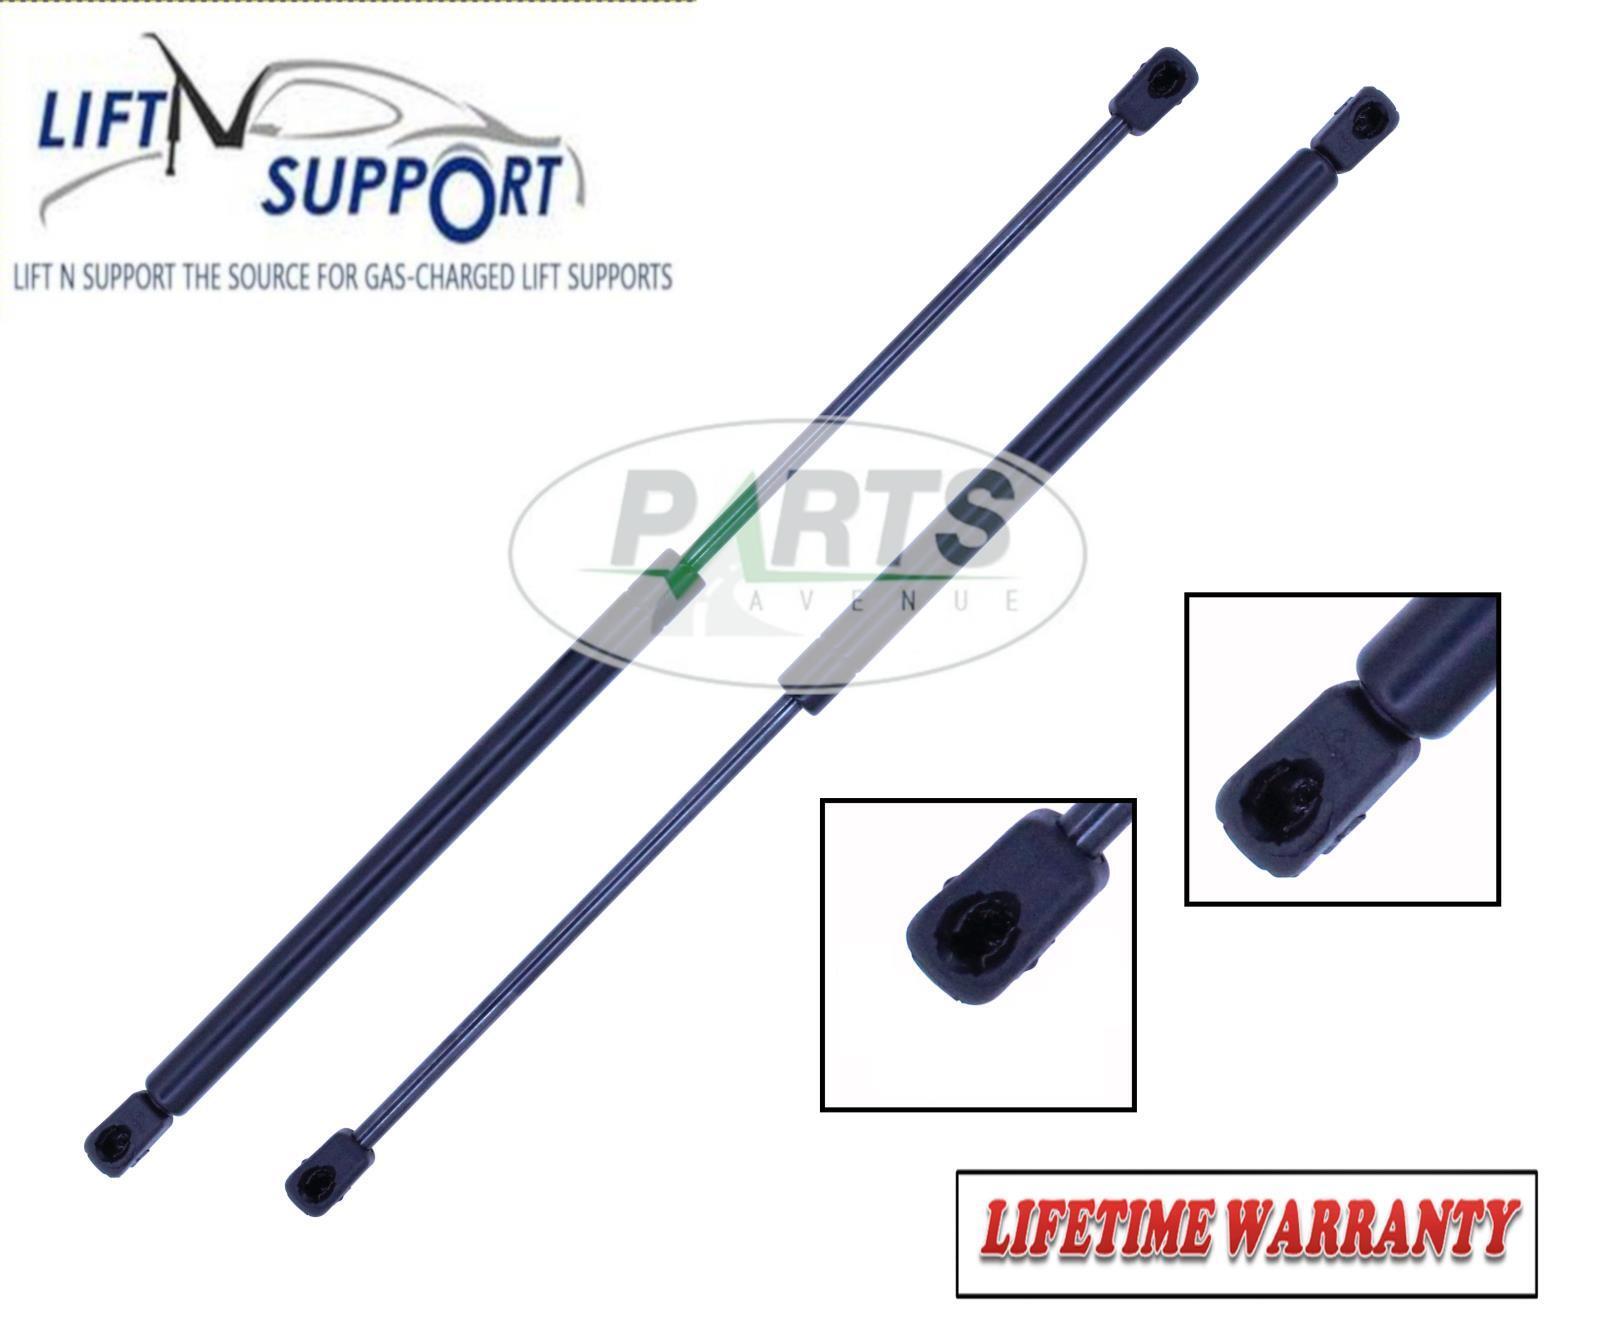 2 FRONT HOOD LIFT SUPPORTS SHOCKS STRUTS ARMS PROPS ROD FITS JEEP GRAND CHEROKEE